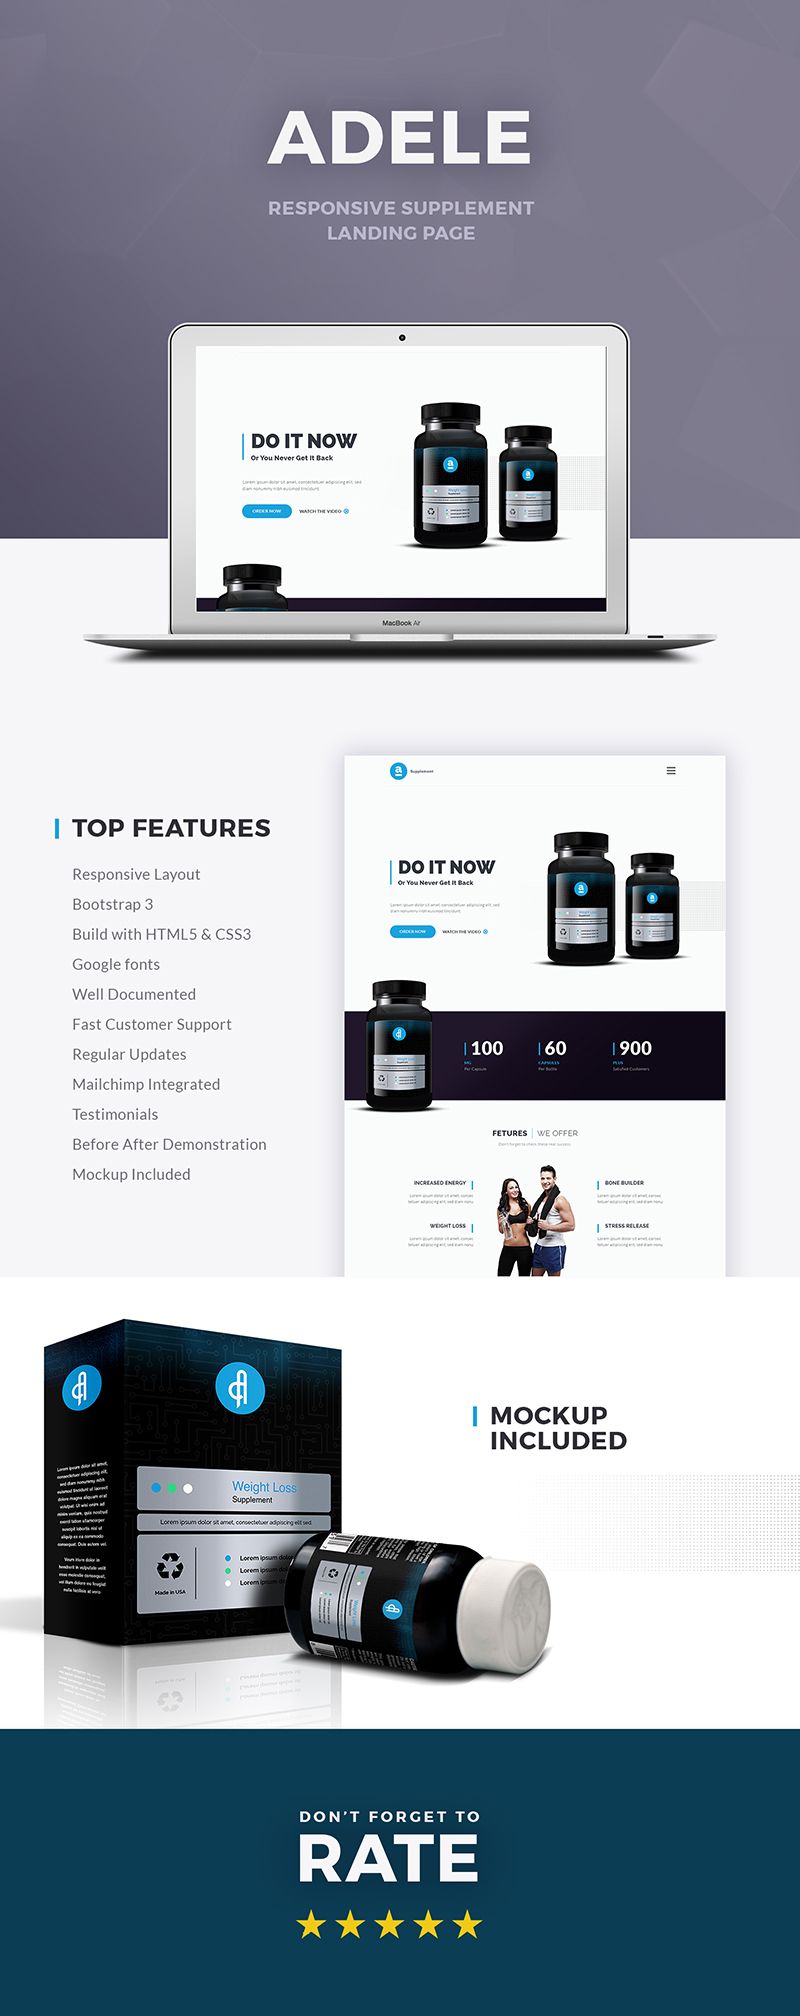 Adele Responsive Supplement HTML Landing Page - 1